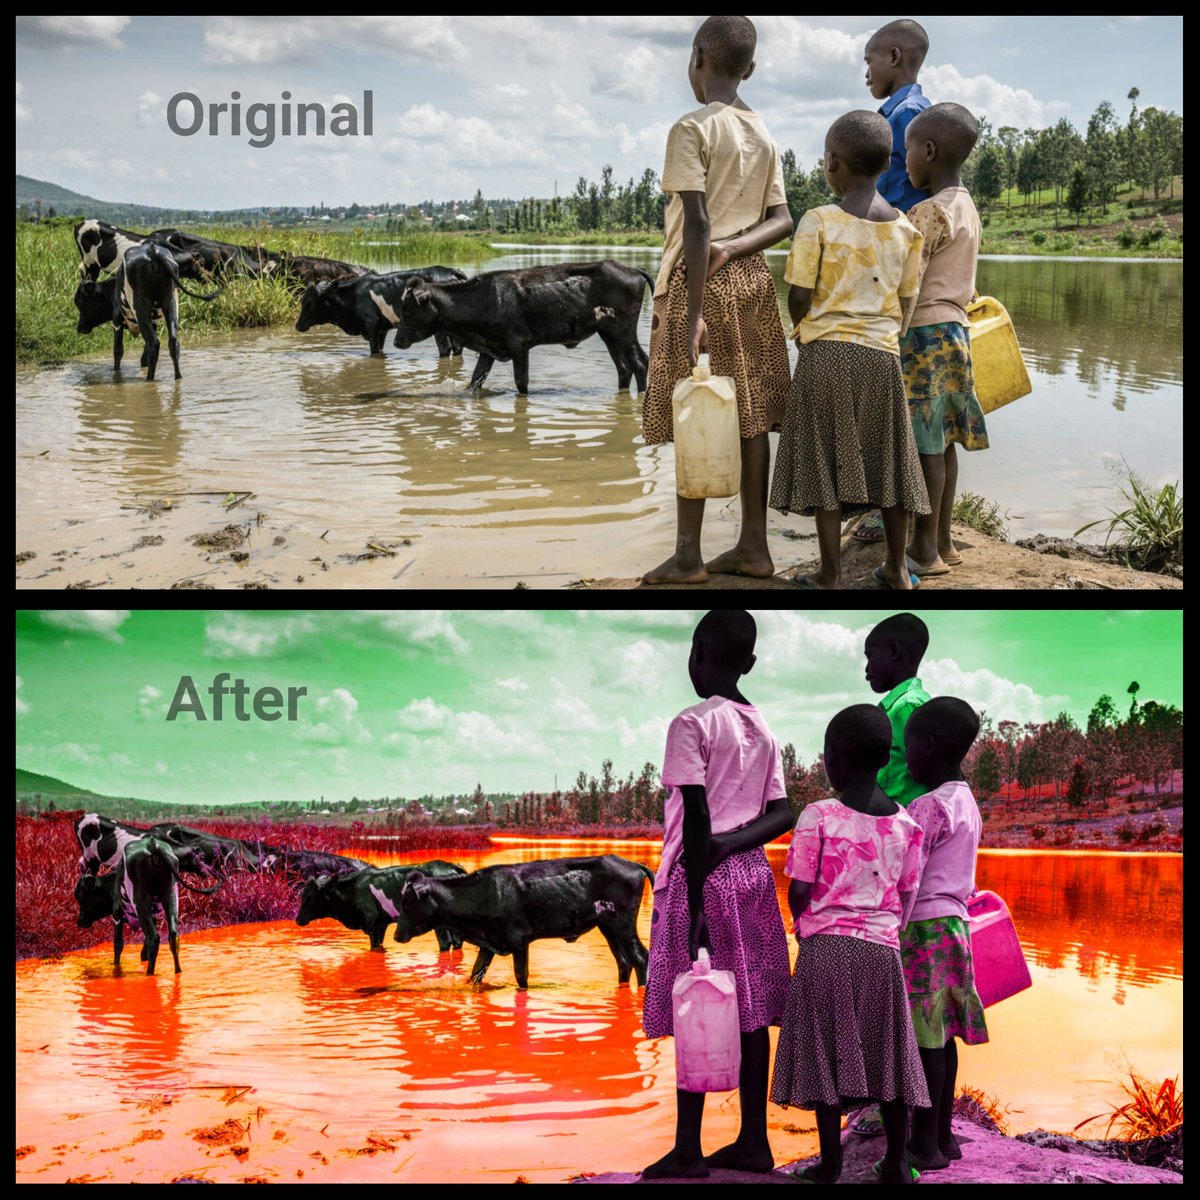 Worked on a class project themed on ' Environmental Degradation ' Picture source Jon Warren/ @WorldVision
I used @PrinceJyesi's creative form of color-saturated photographs to bring out the life in this picture.